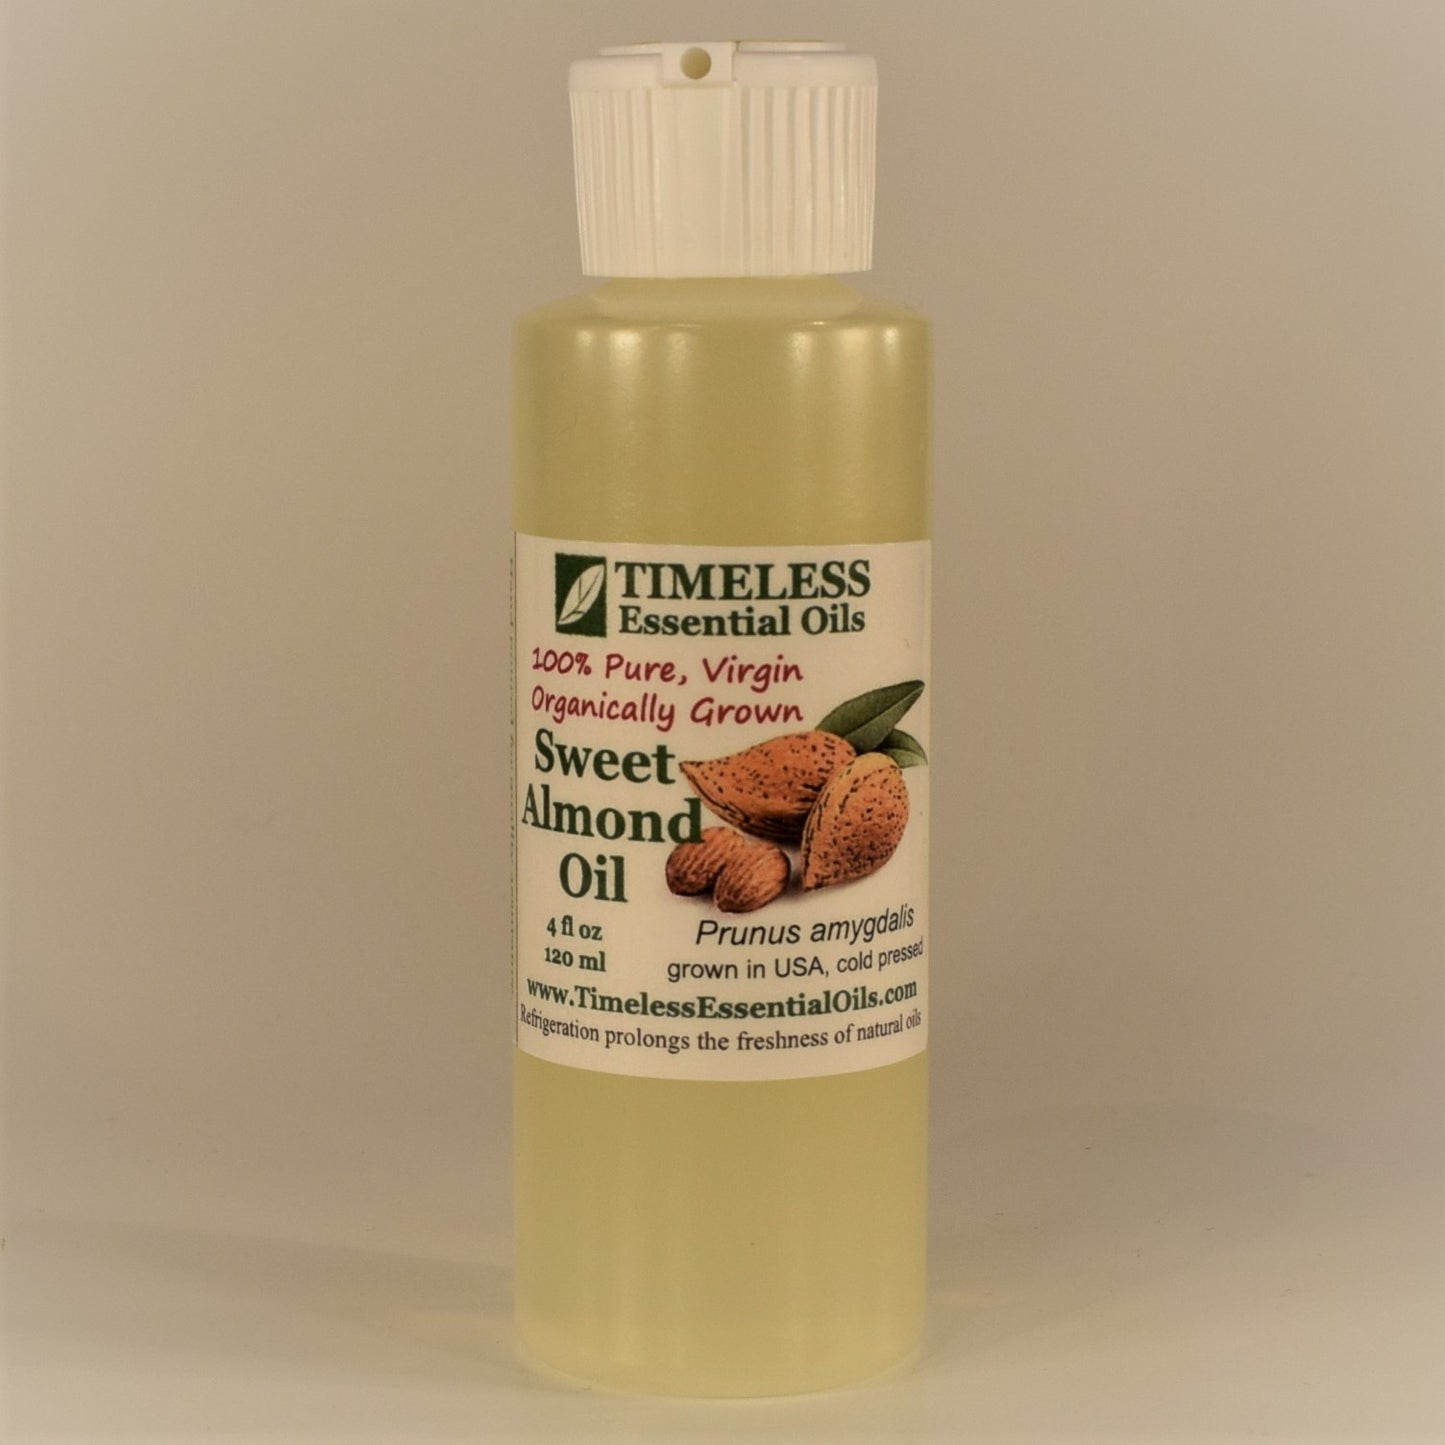 TIMELESS Virgin, Organic Sweet Almond Oil for aromatherapy and massage